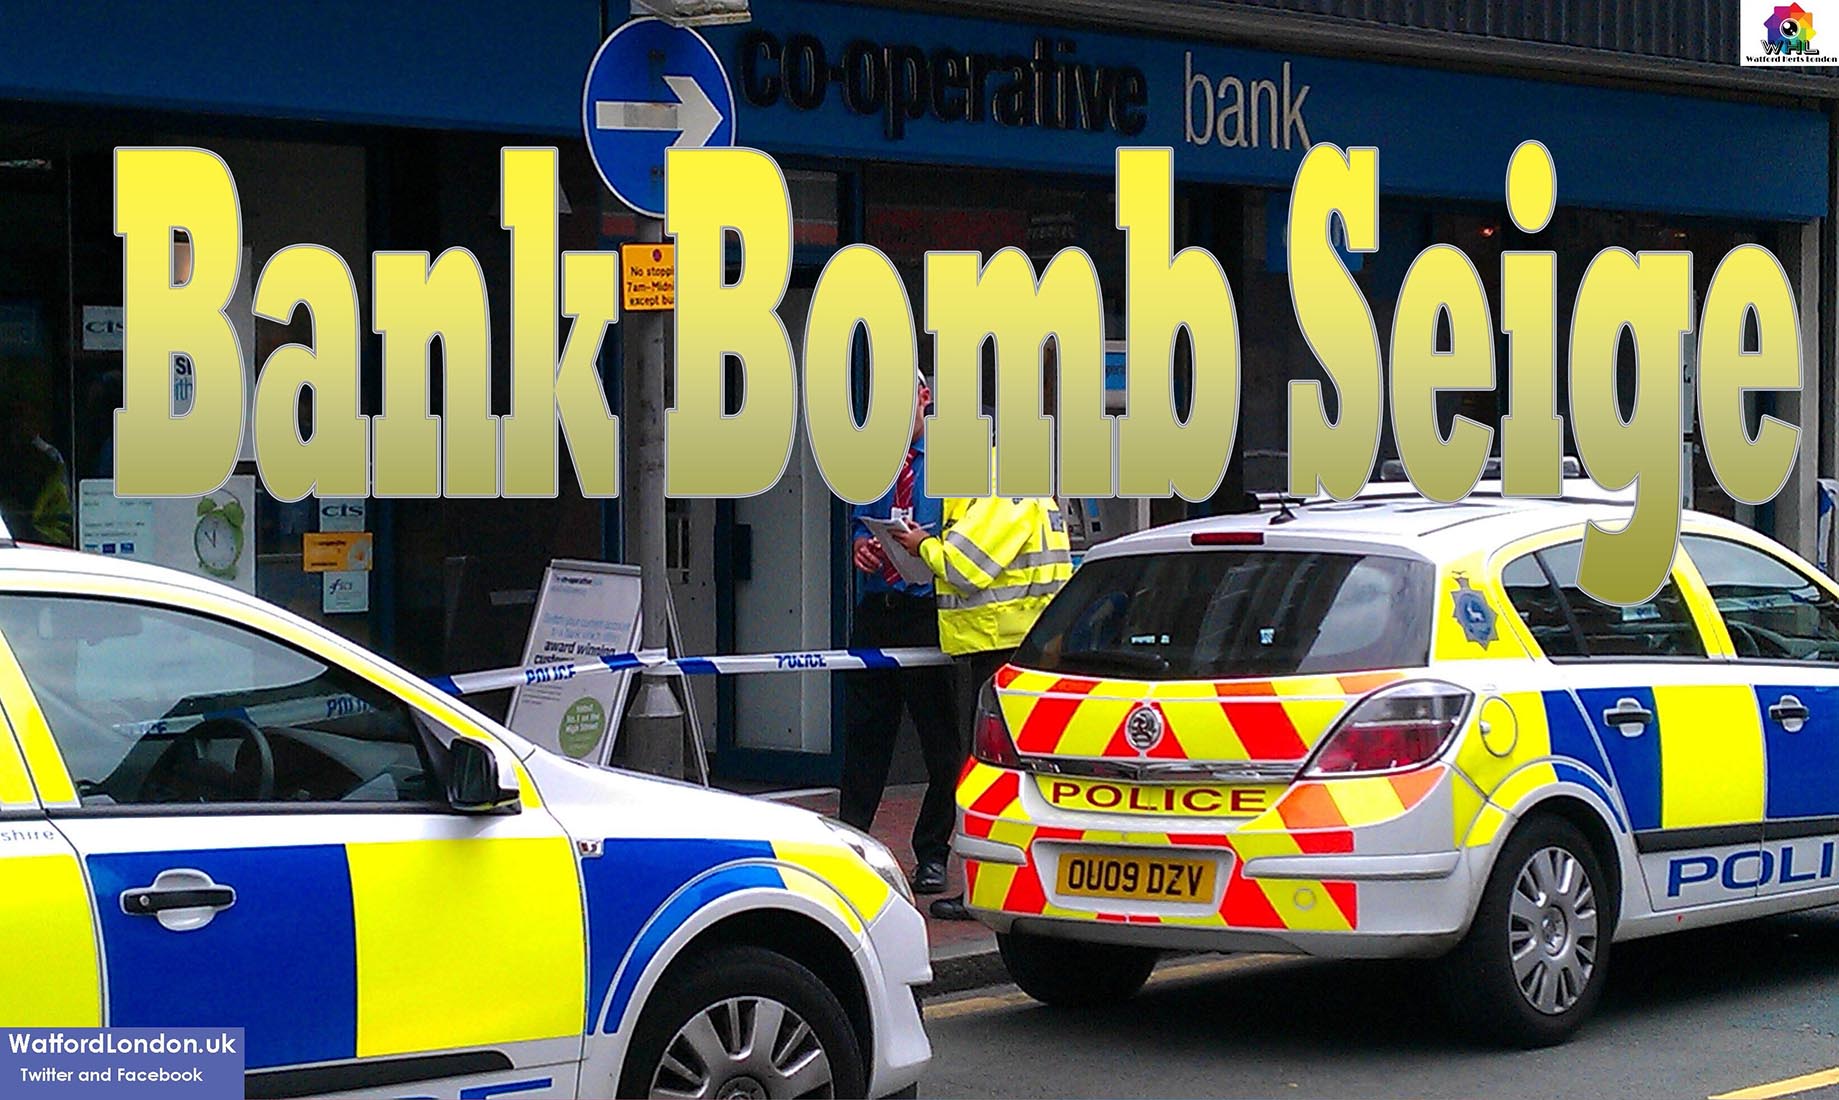 Luton Muslim Men guilty for Bank Bomb Robbery Siege caused Panic in Watford